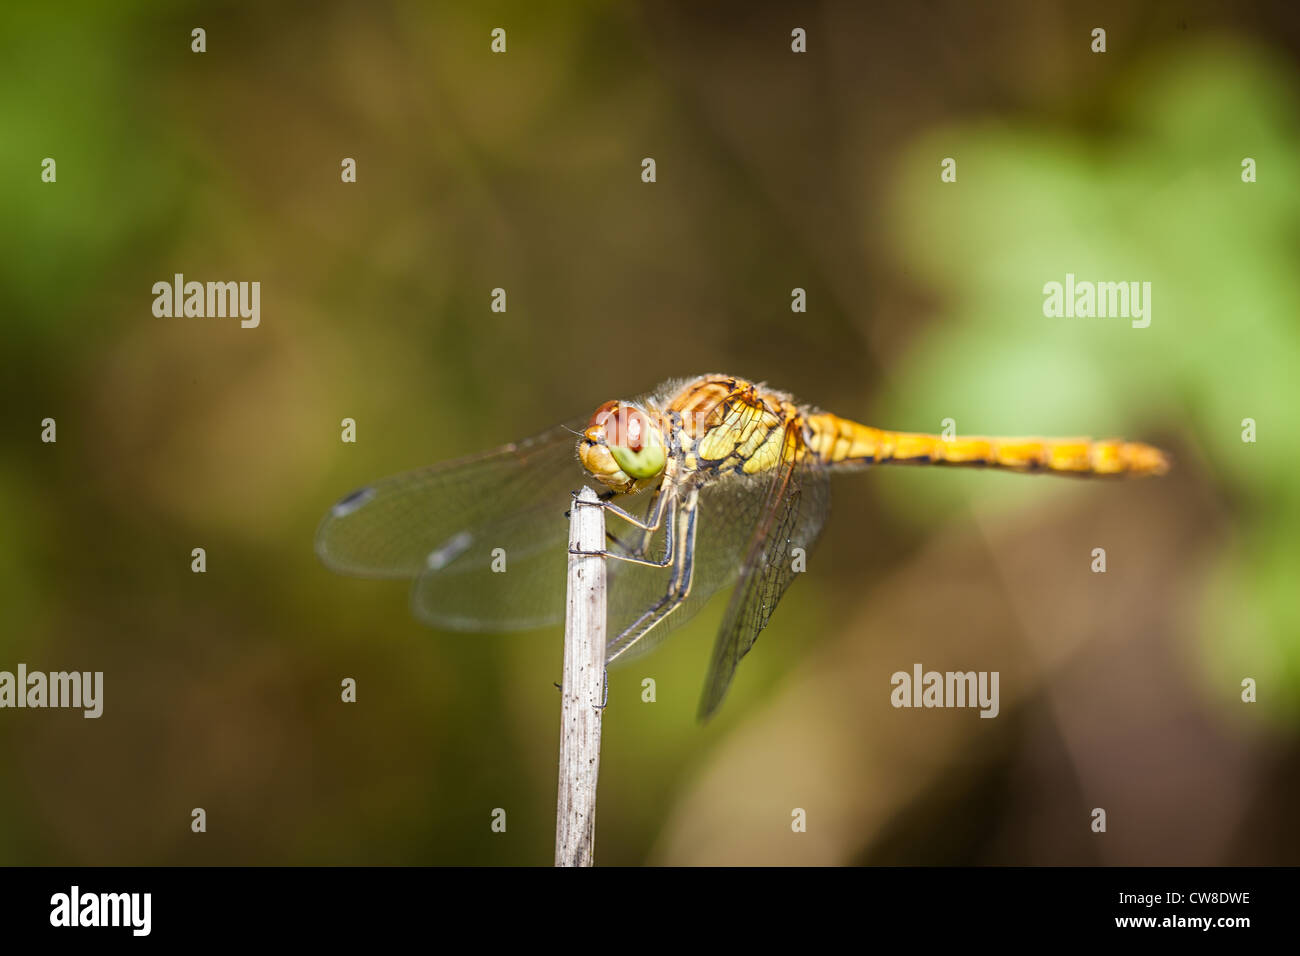 Female Common Darter Dragon fly at rest Stock Photo